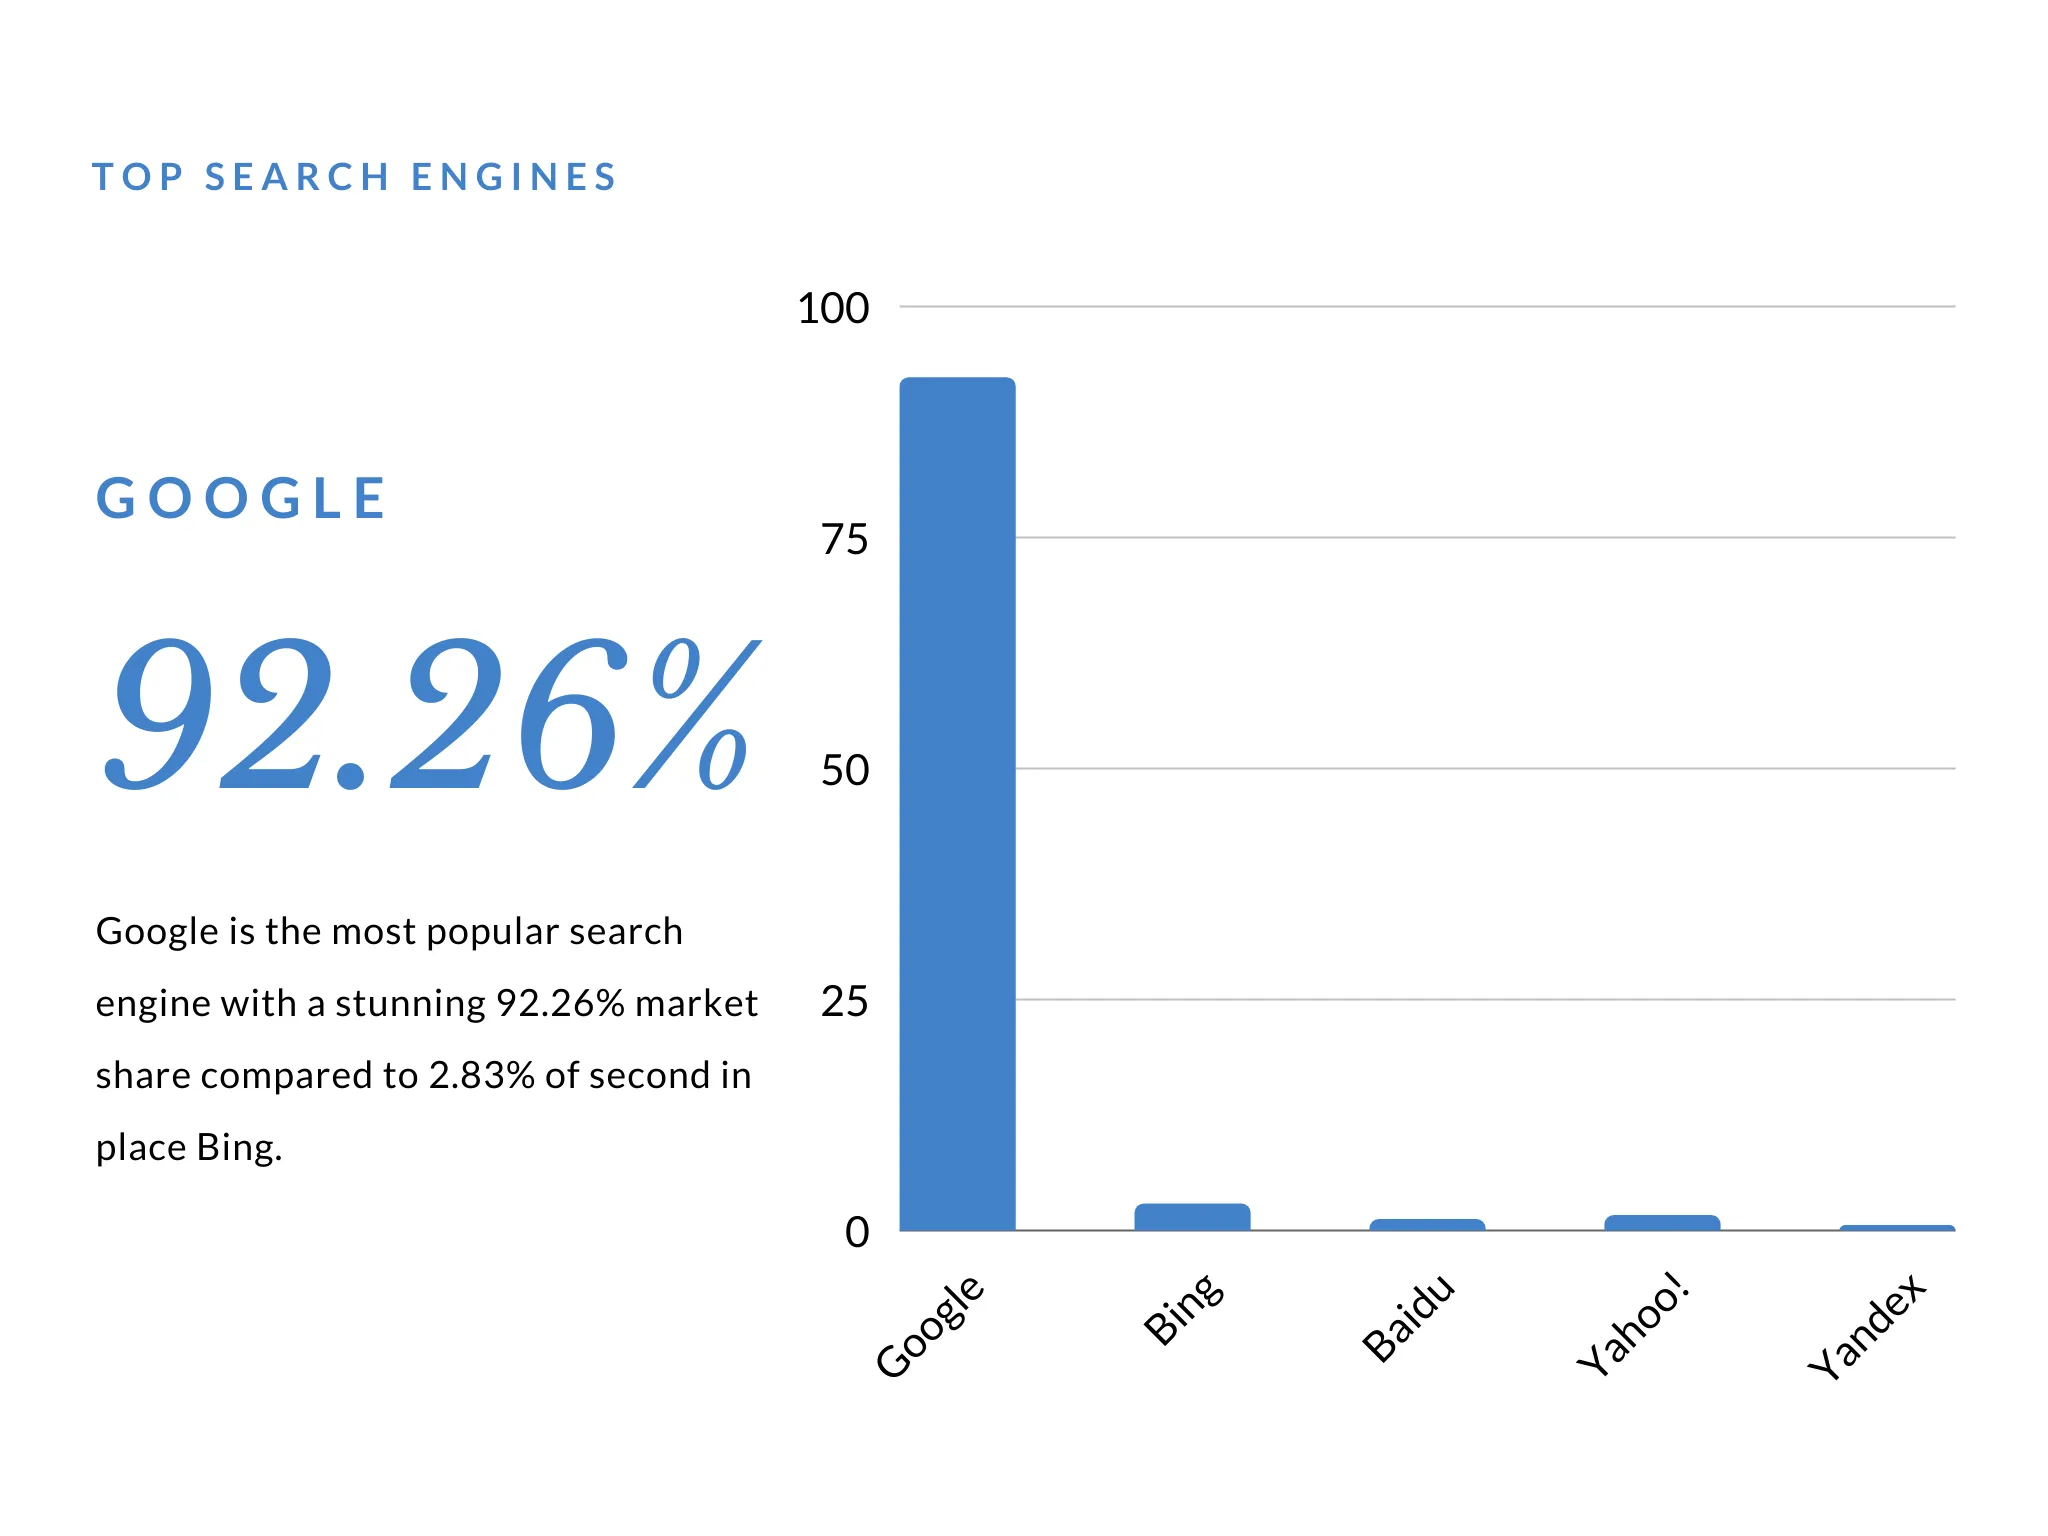 Google's search engine market share